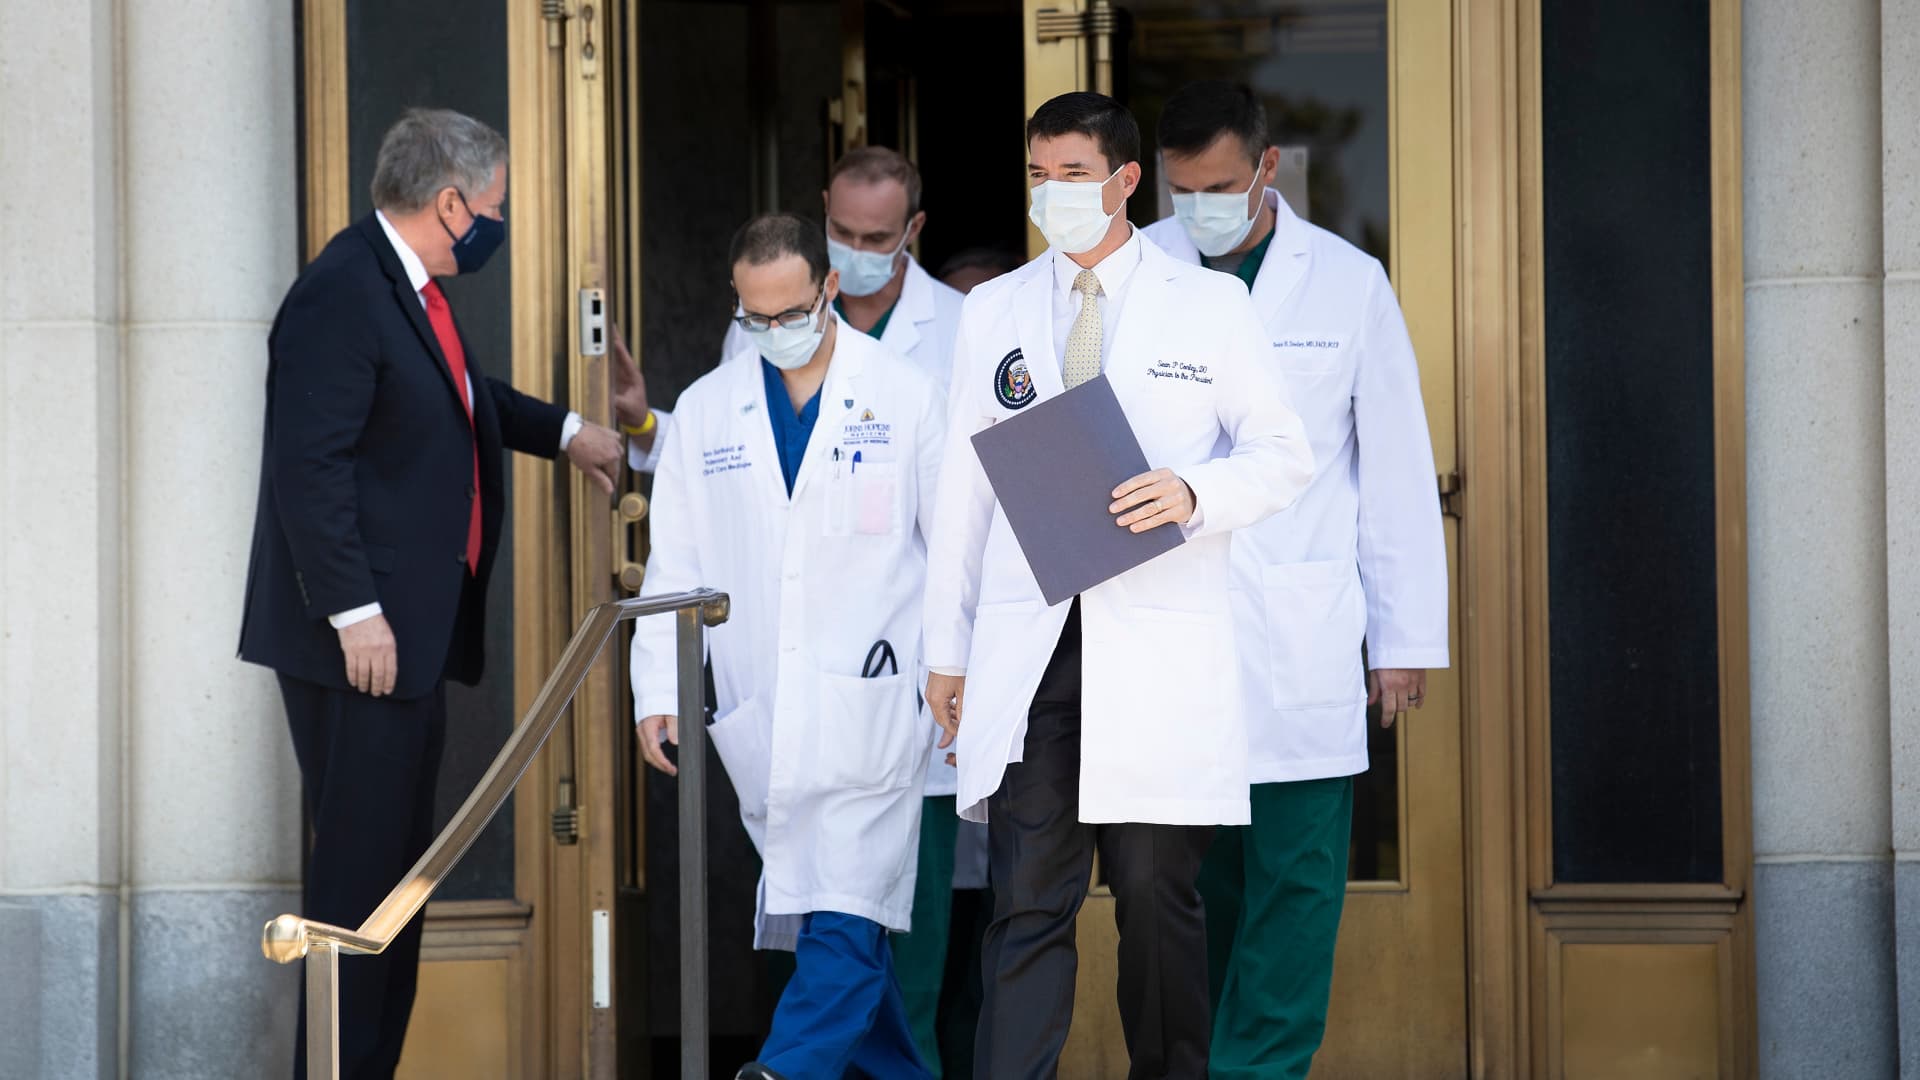 Acting White House Chief of Staff Mark Meadows holds the door for Sean Conley(front C), Physician to US President Donald Trump, and other members of the President's medical team as they arrive to give an update on the President's health at Walter Reed Medical Center during treatment for a COVID-19 infection October 4, 2020, in Bethesda, Maryland.